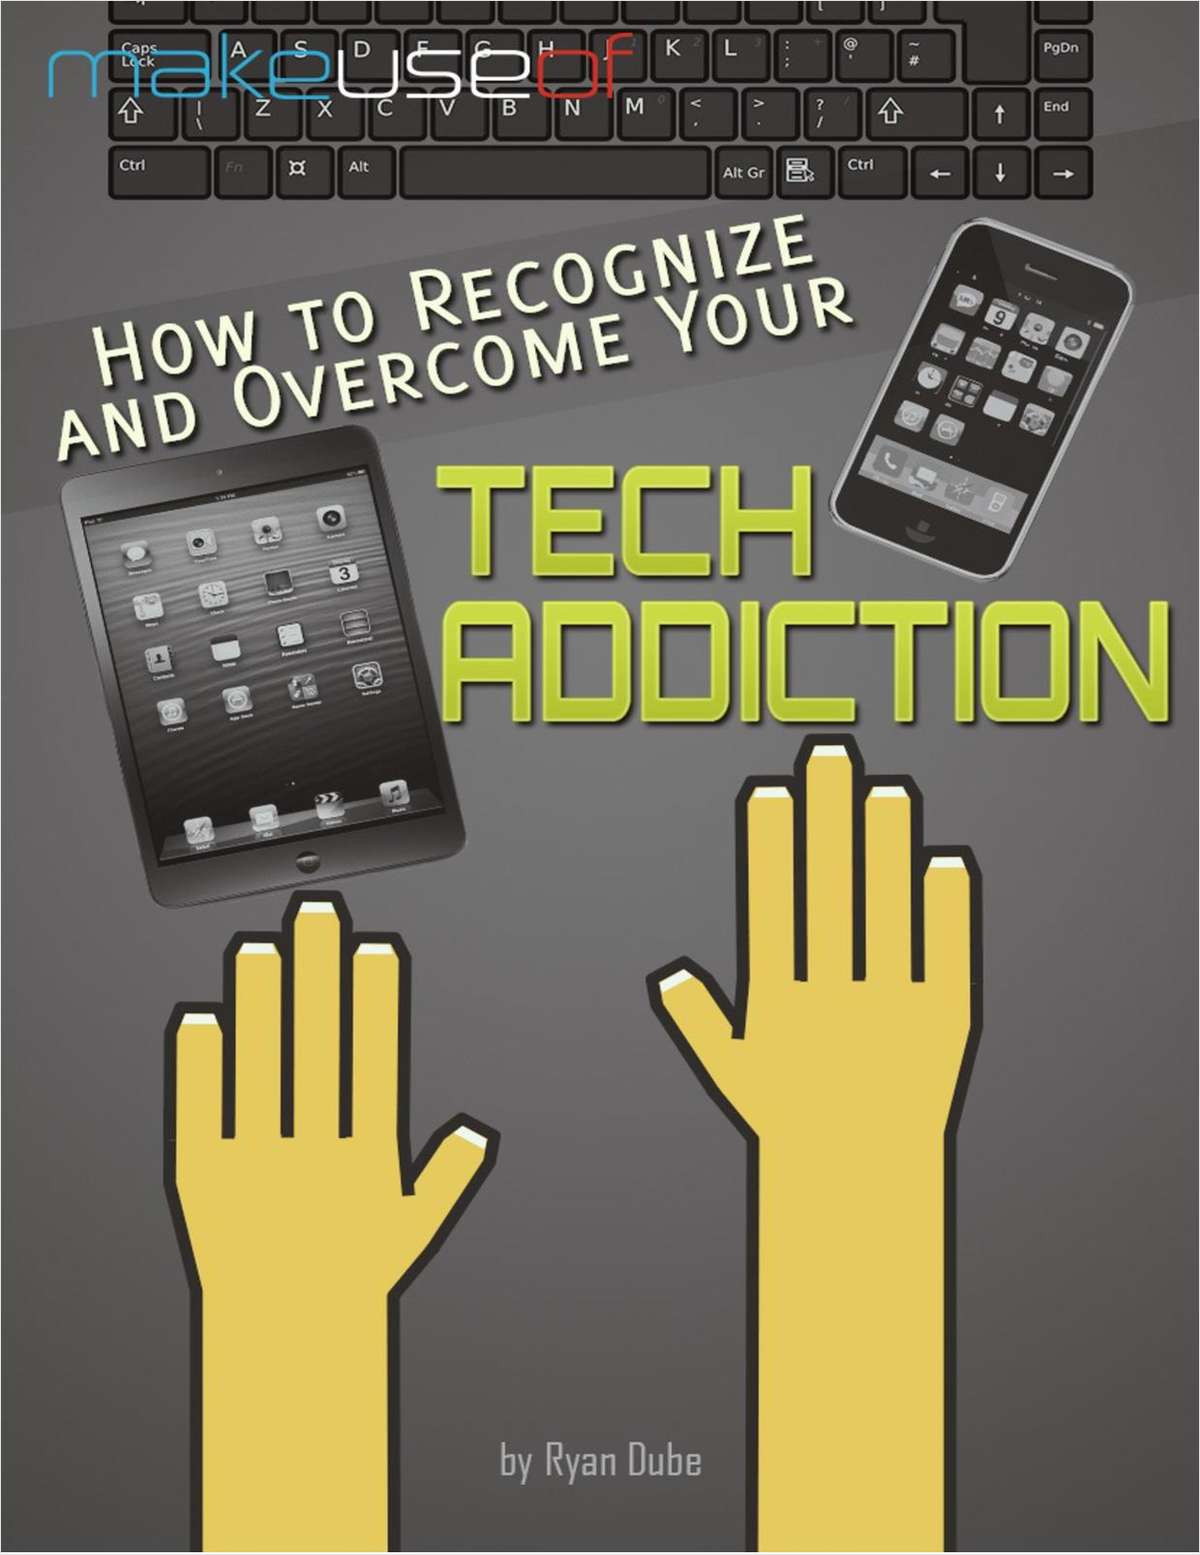 How to Recognize and Overcome Your Tech Addiction